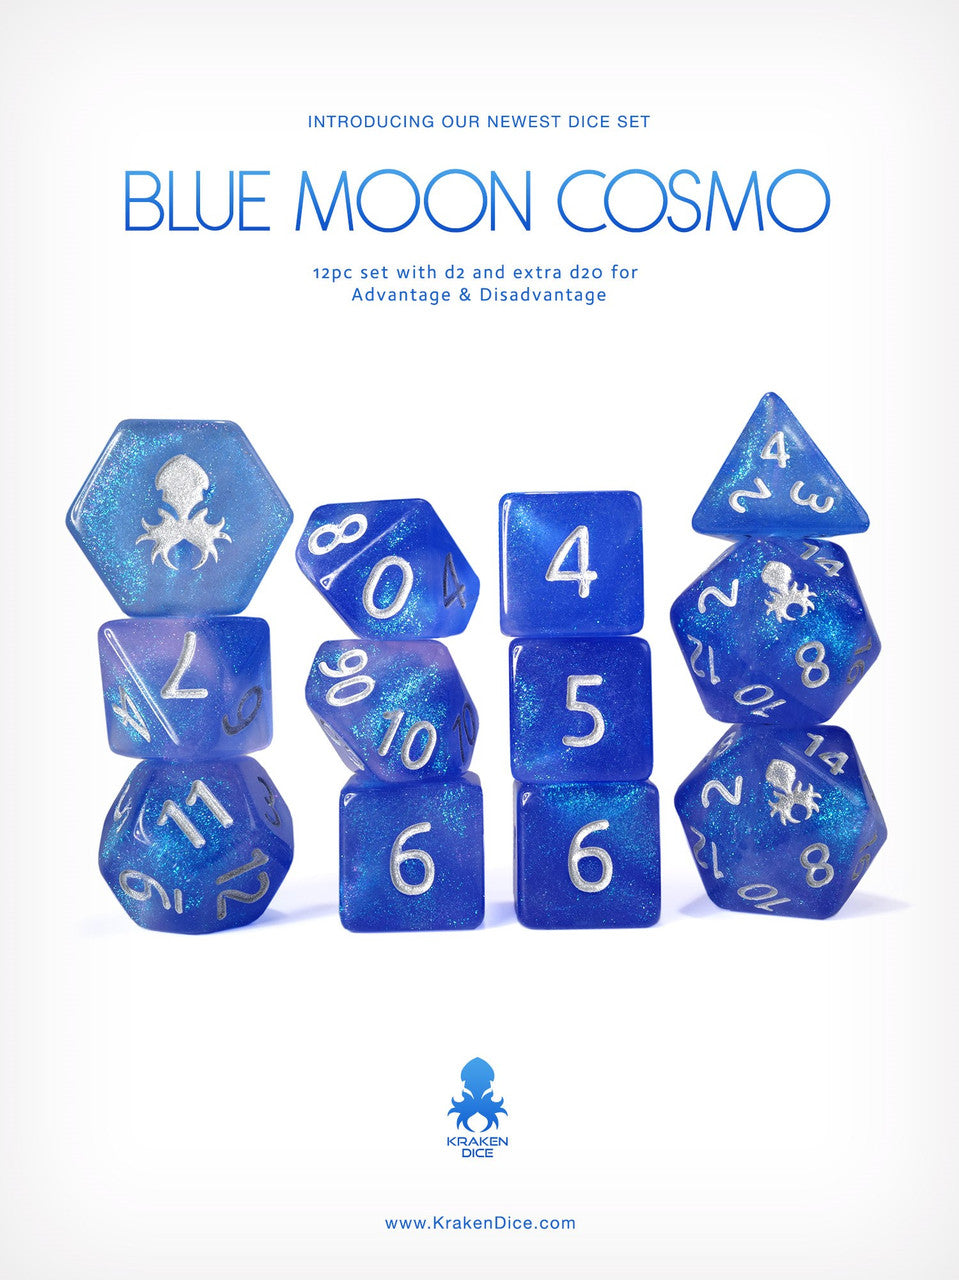 Kraken's Blue Moon Cosmo 12pc Polyhedral Dice Set